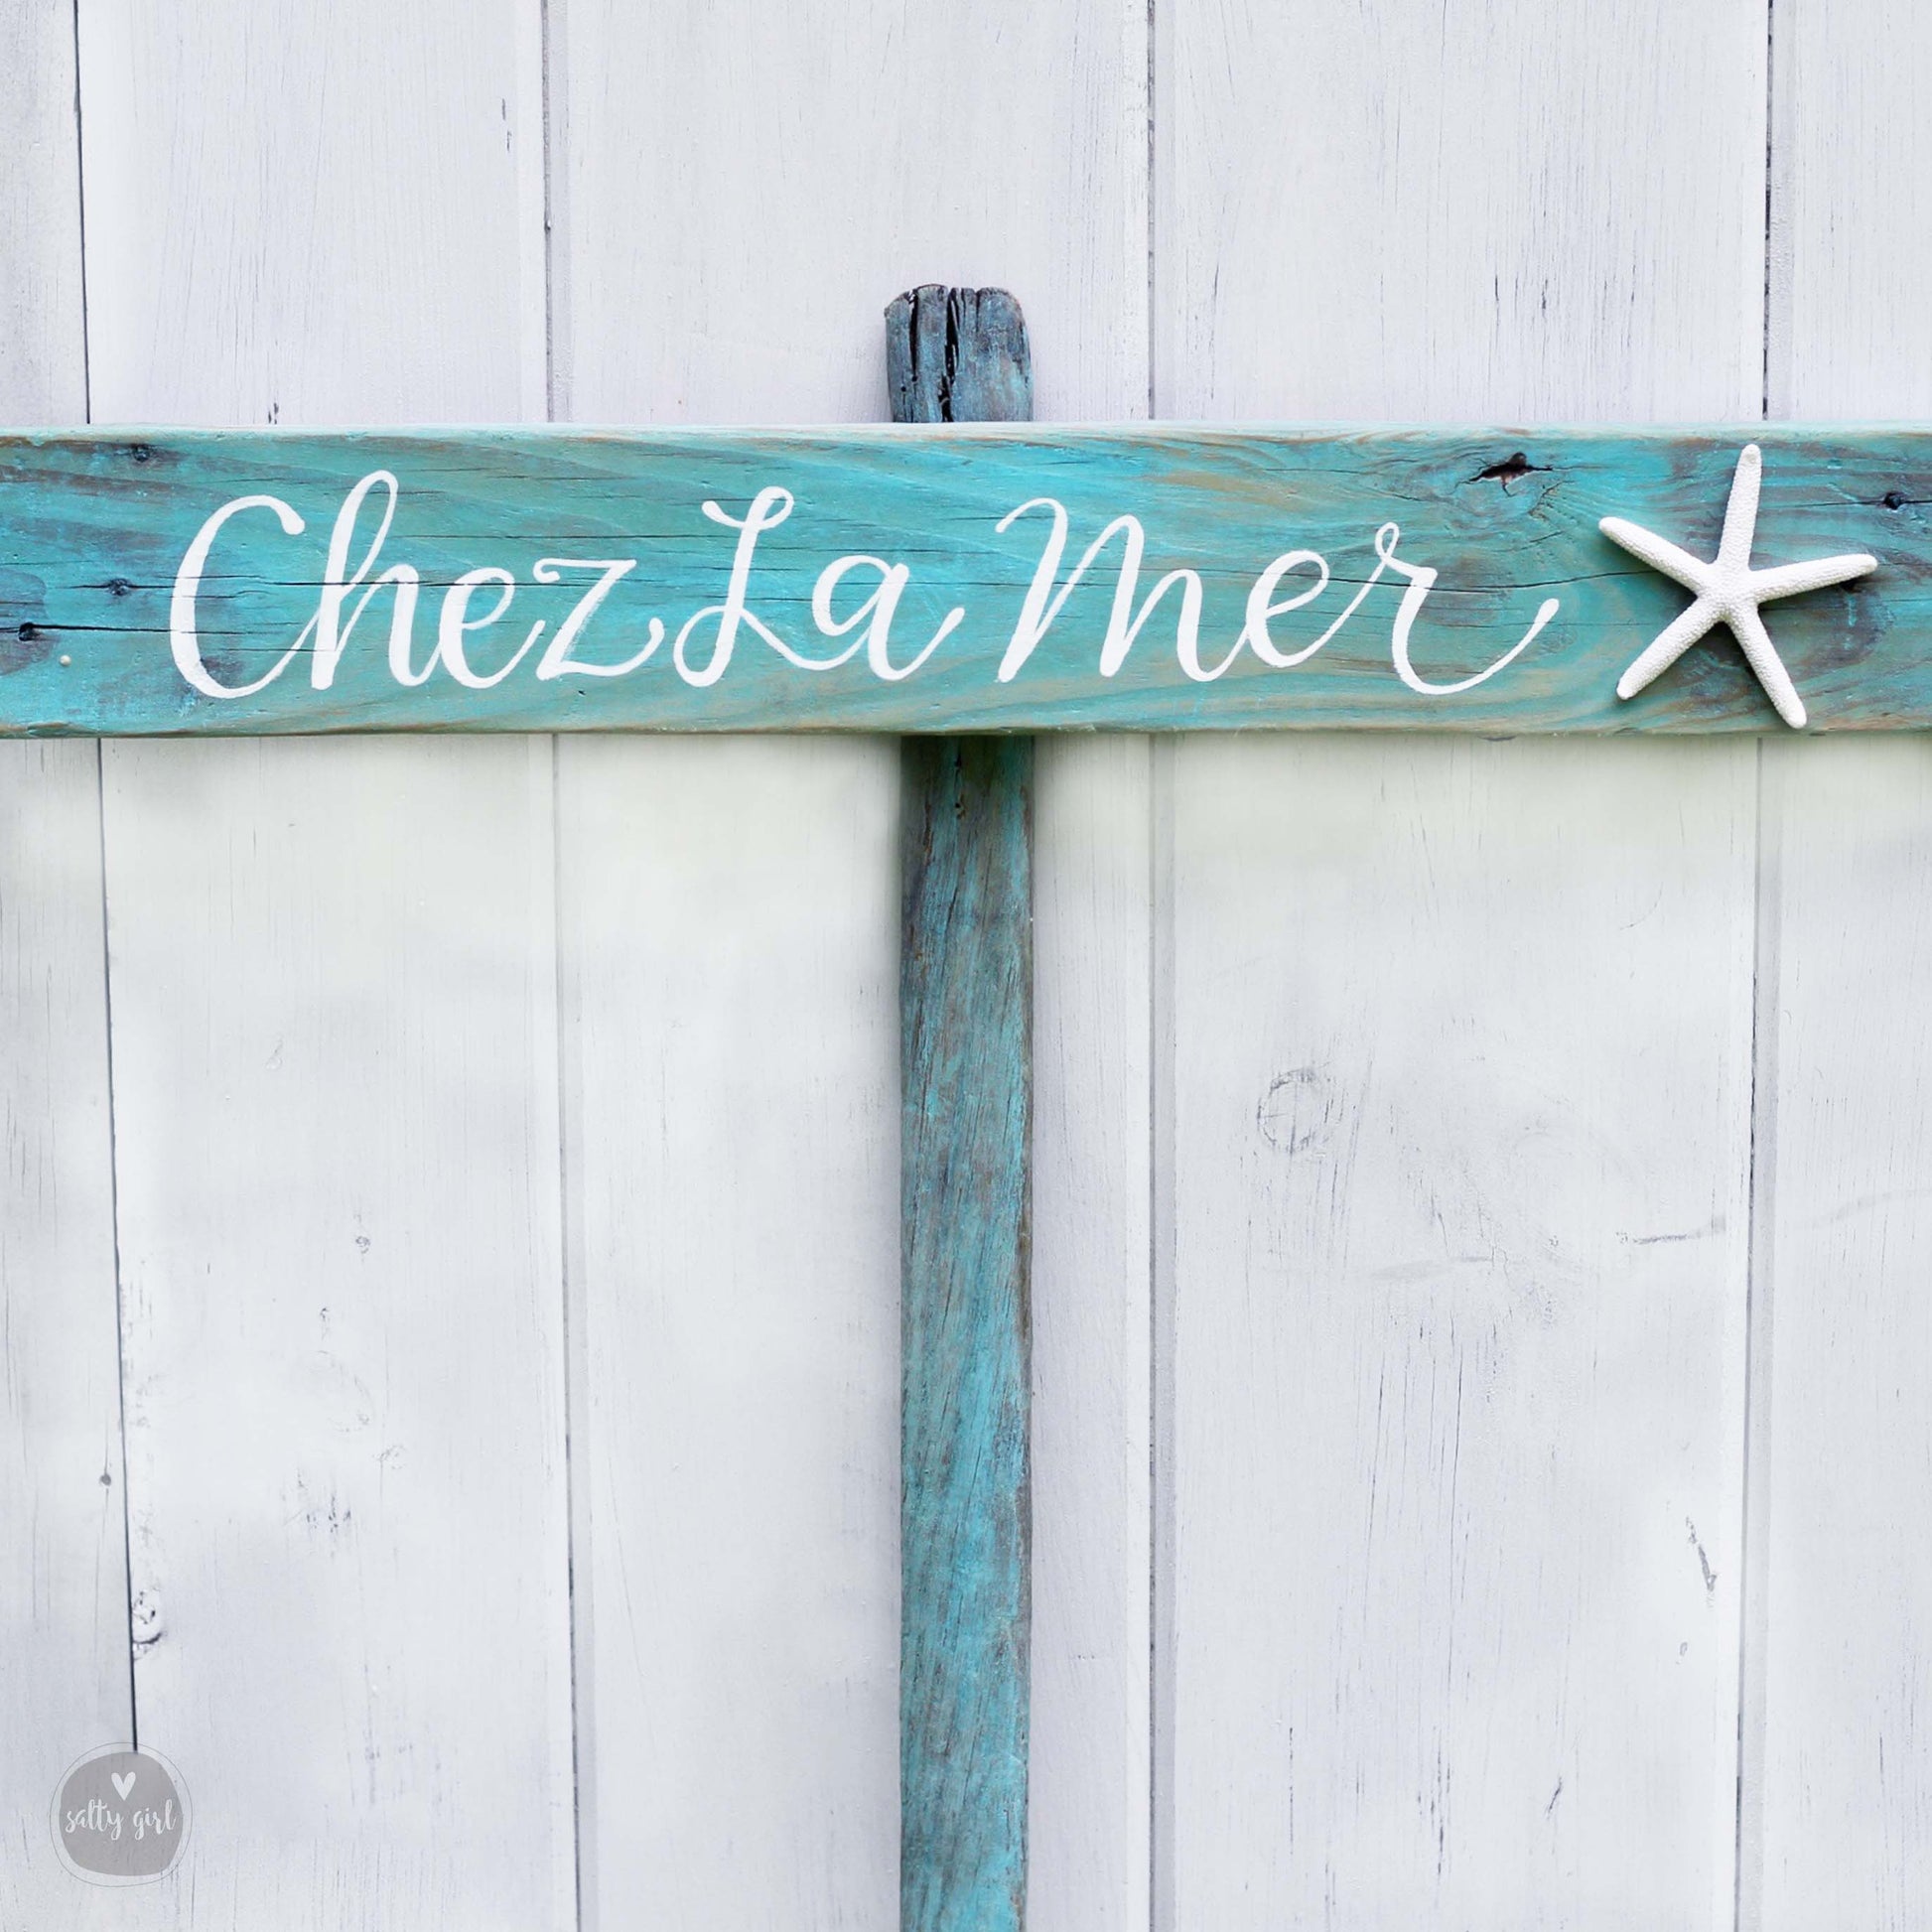 a wooden sign that says cheesta mer on it